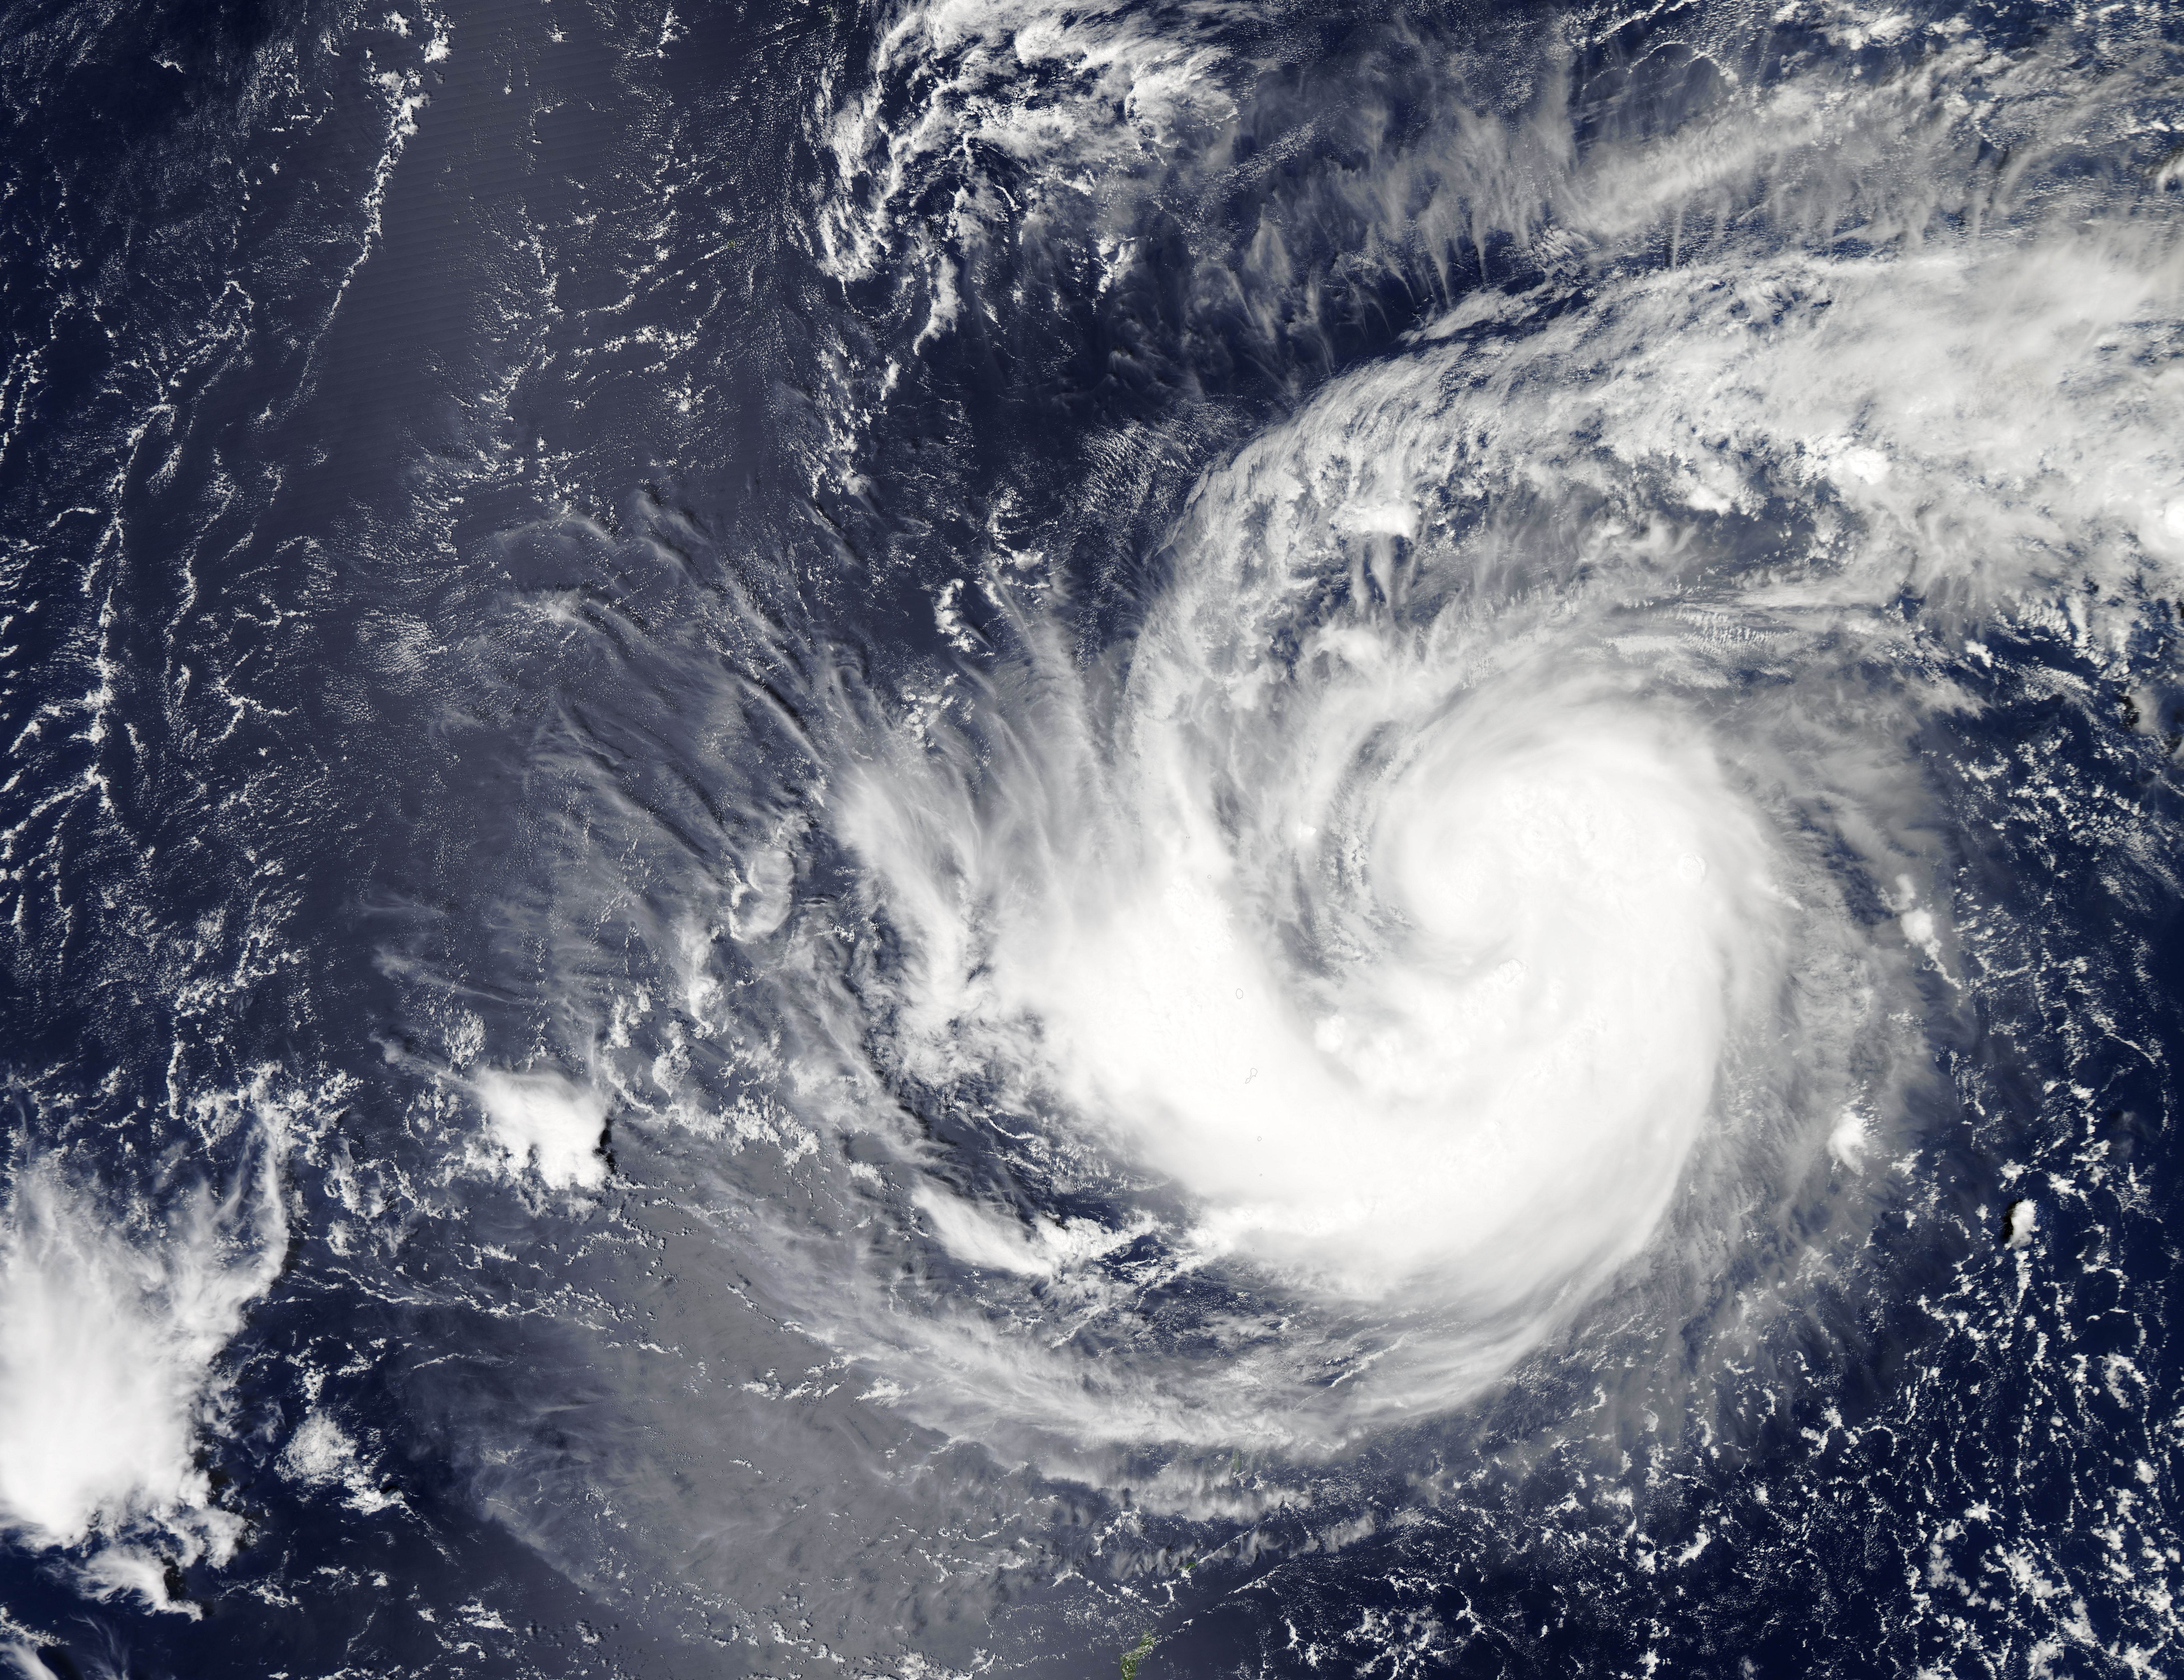 This September 16, 2015 NASA satellite image shows Tropical Storm Krovanh in the western Pacific Ocean. Late September 15 night, local time, then-Tropical Depression 20W strengthened into a tropical storm, with wind speeds gusting to 83 km/h (52 mph). 20W, which eventually was named Krovanh, was about 450 miles northeast of Guam. Even more strengthening is expected throughout the week, with Krovanh likely becoming a typhoon by September 17. Forecasters believe the storm will remain away from land. == RESTRICTED TO EDITORIAL USE / MANDATORY CREDIT: "AFP PHOTO / HANDOUT-NASA" NO MARKETING, NO ADVERTISING CAMPAIGNS, DISTRIBUTED AS A SERVICE TO CLIENTS ==